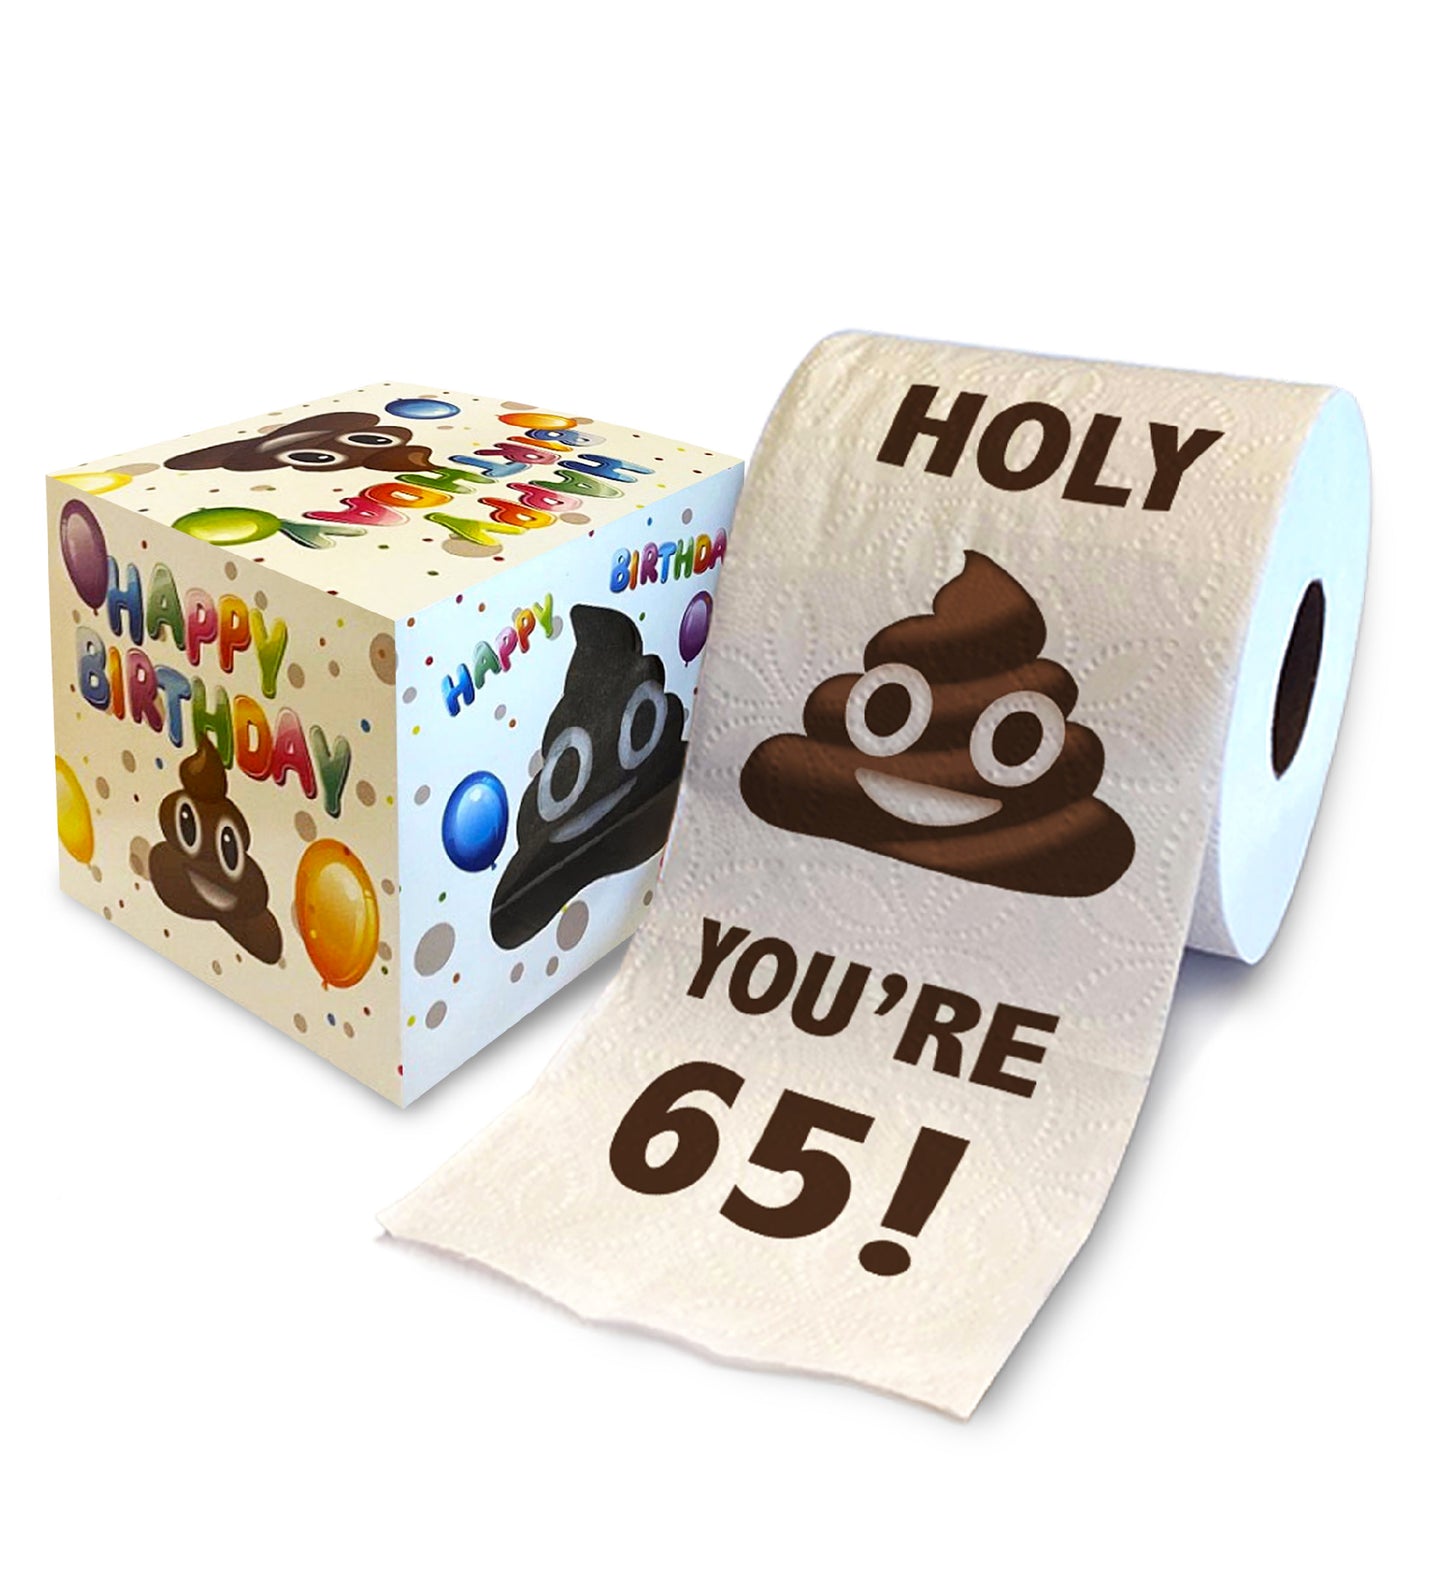 Printed TP Holy Poop You're 65 Funny Toilet Paper Roll Birthday Party Gag Gift